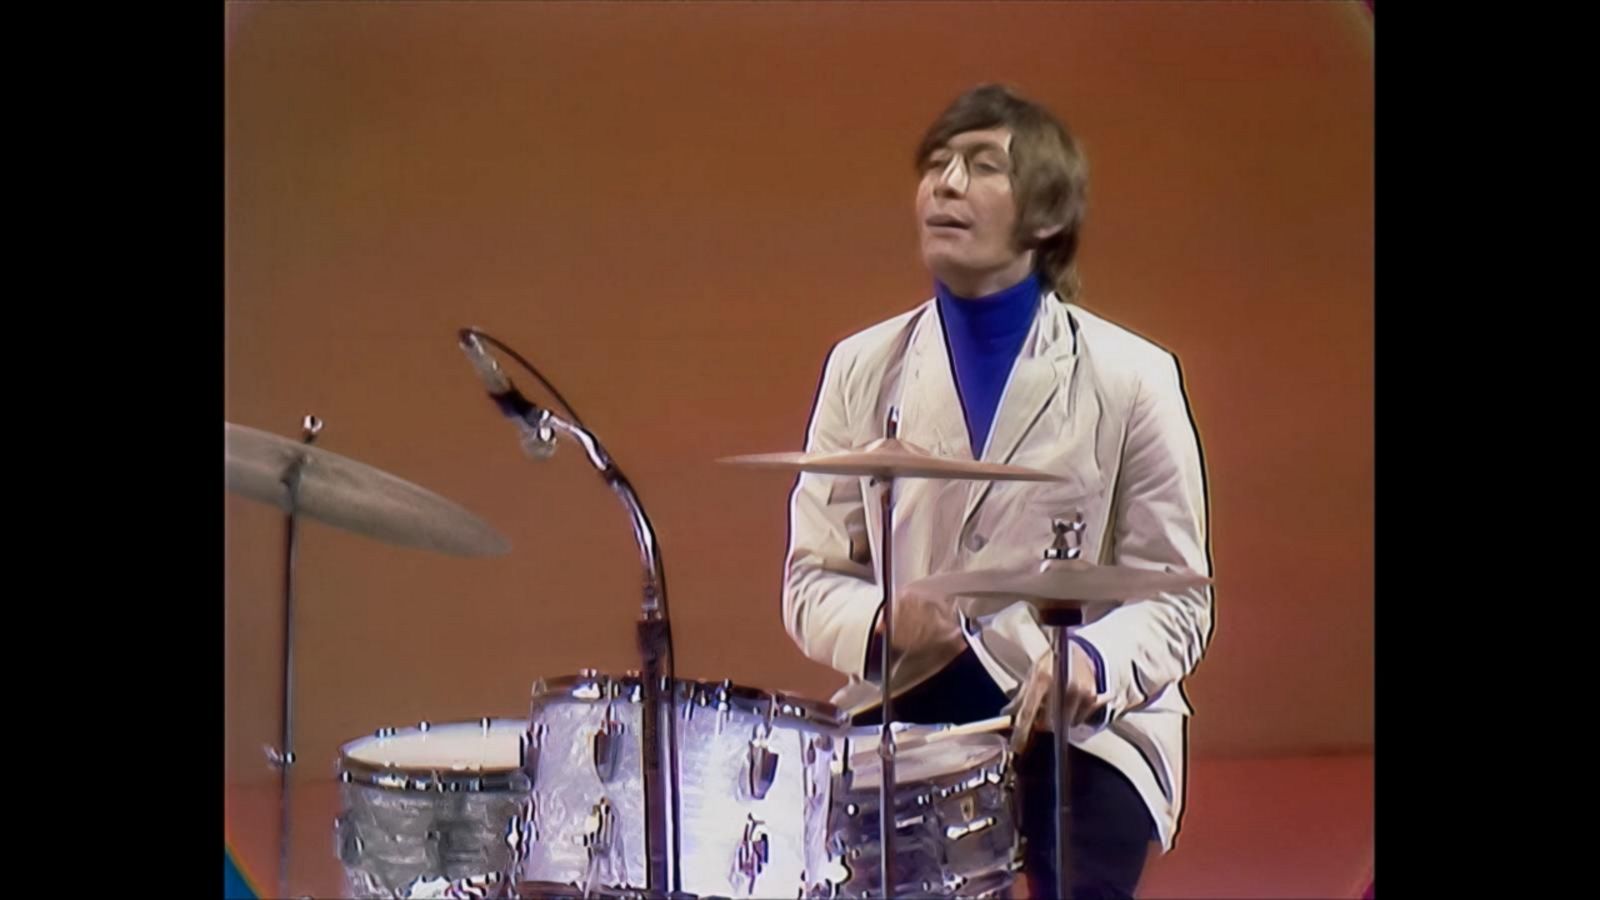 Charlie Watts' Final Performance With the Rolling Stones: Watch